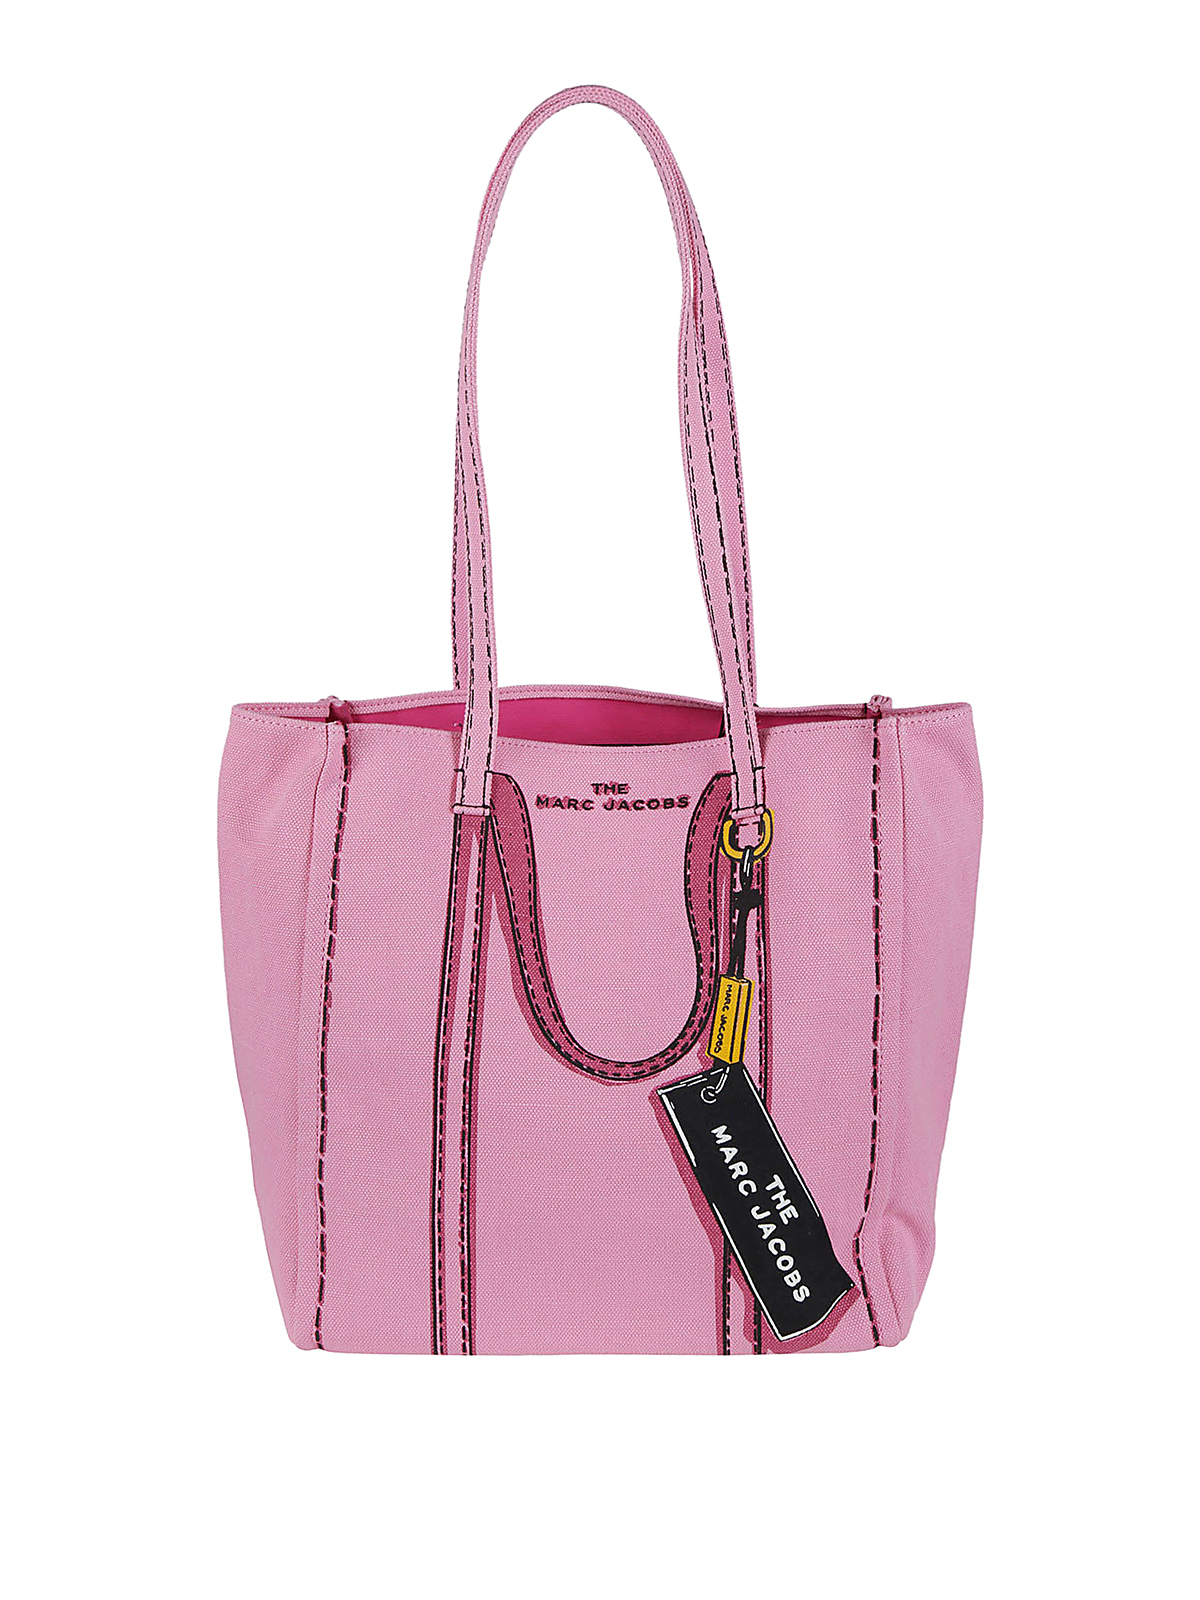 MARC JACOBS THE TROMPE LOEIL TAG PINK CANVAS TOTE